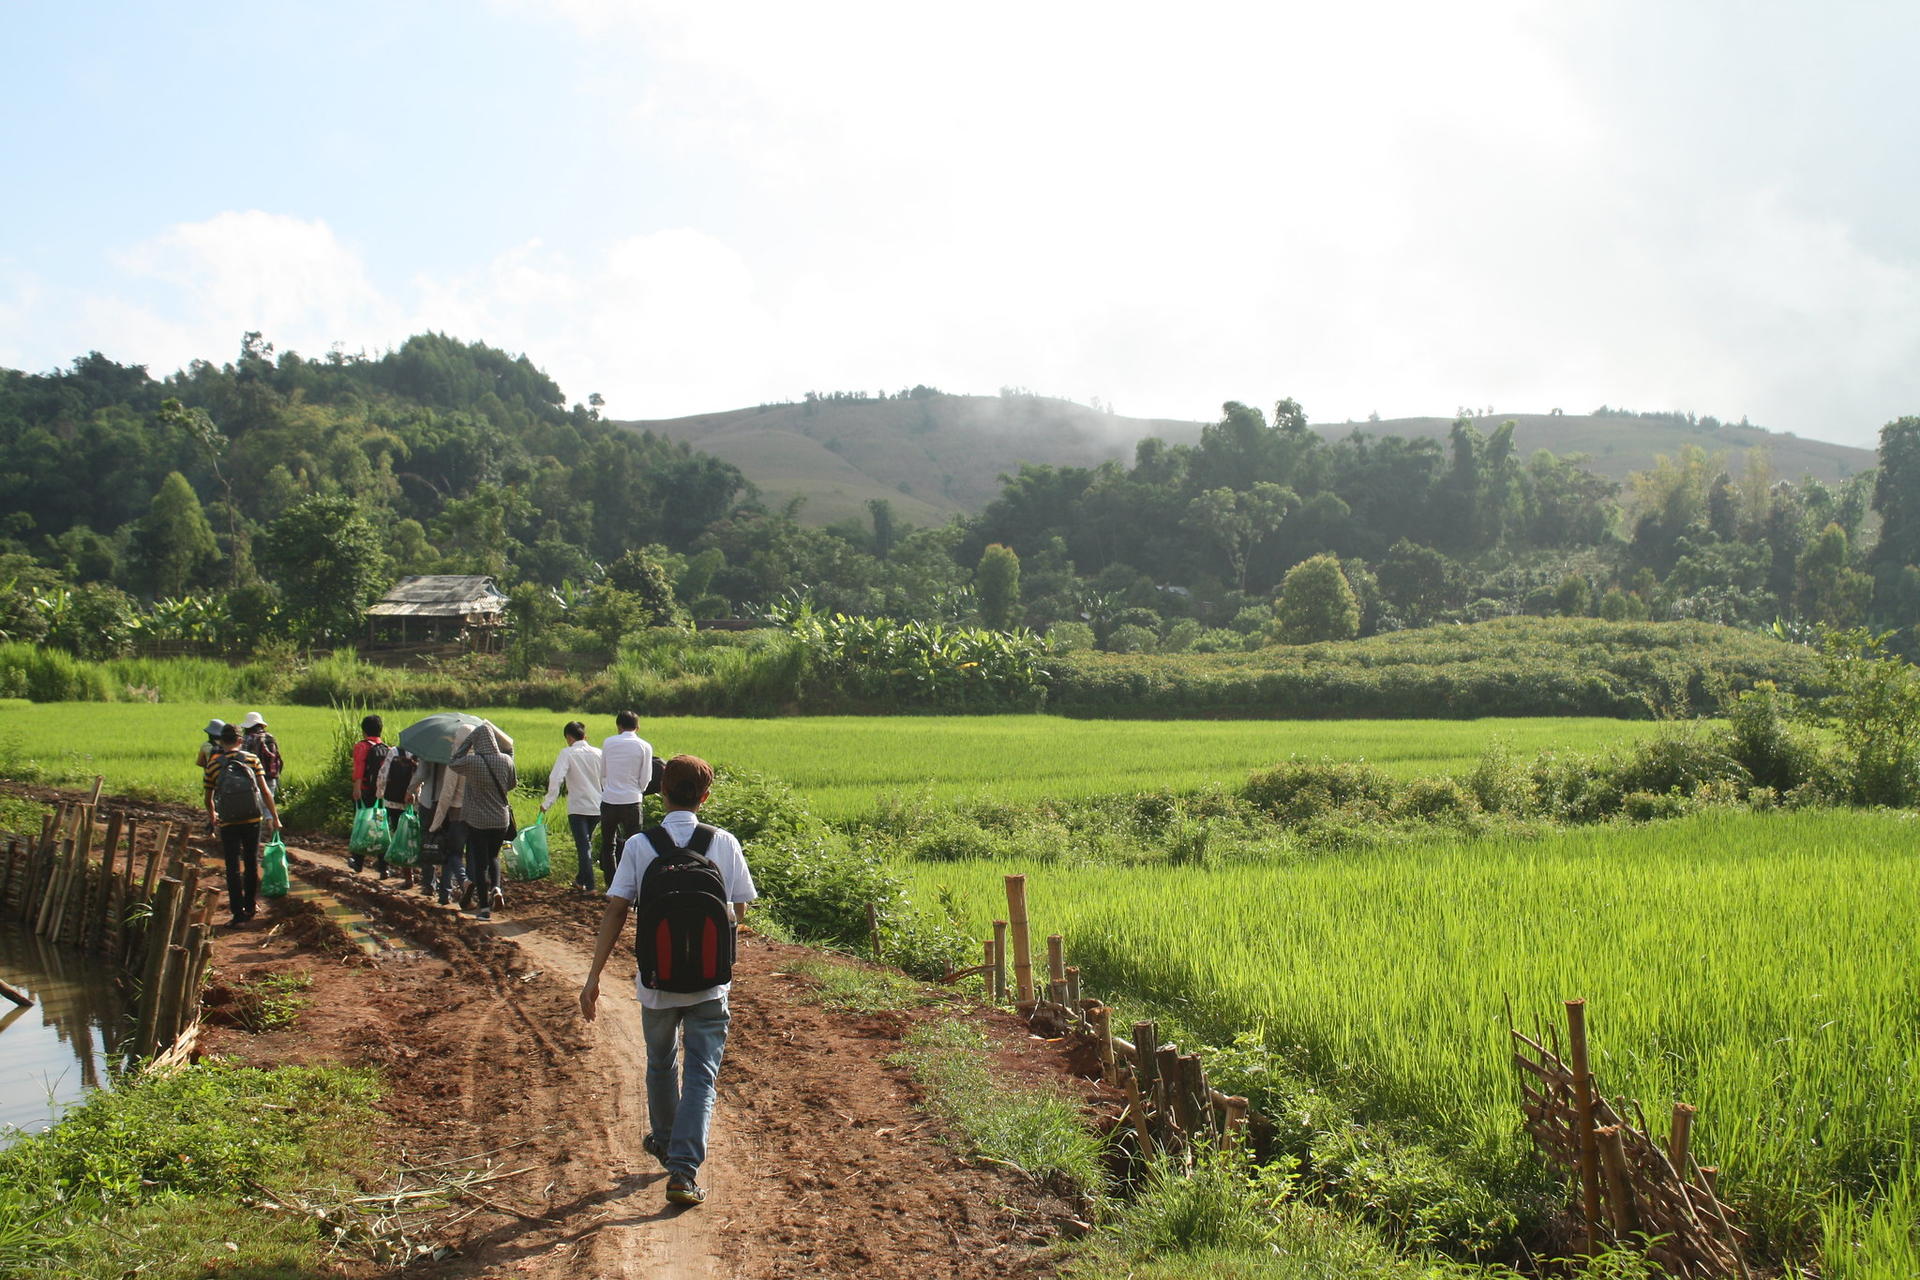 Research team joined by local Vietnamese guides go from village to village to collect baseline data in Son La province in Vietnam's Mai Son district.